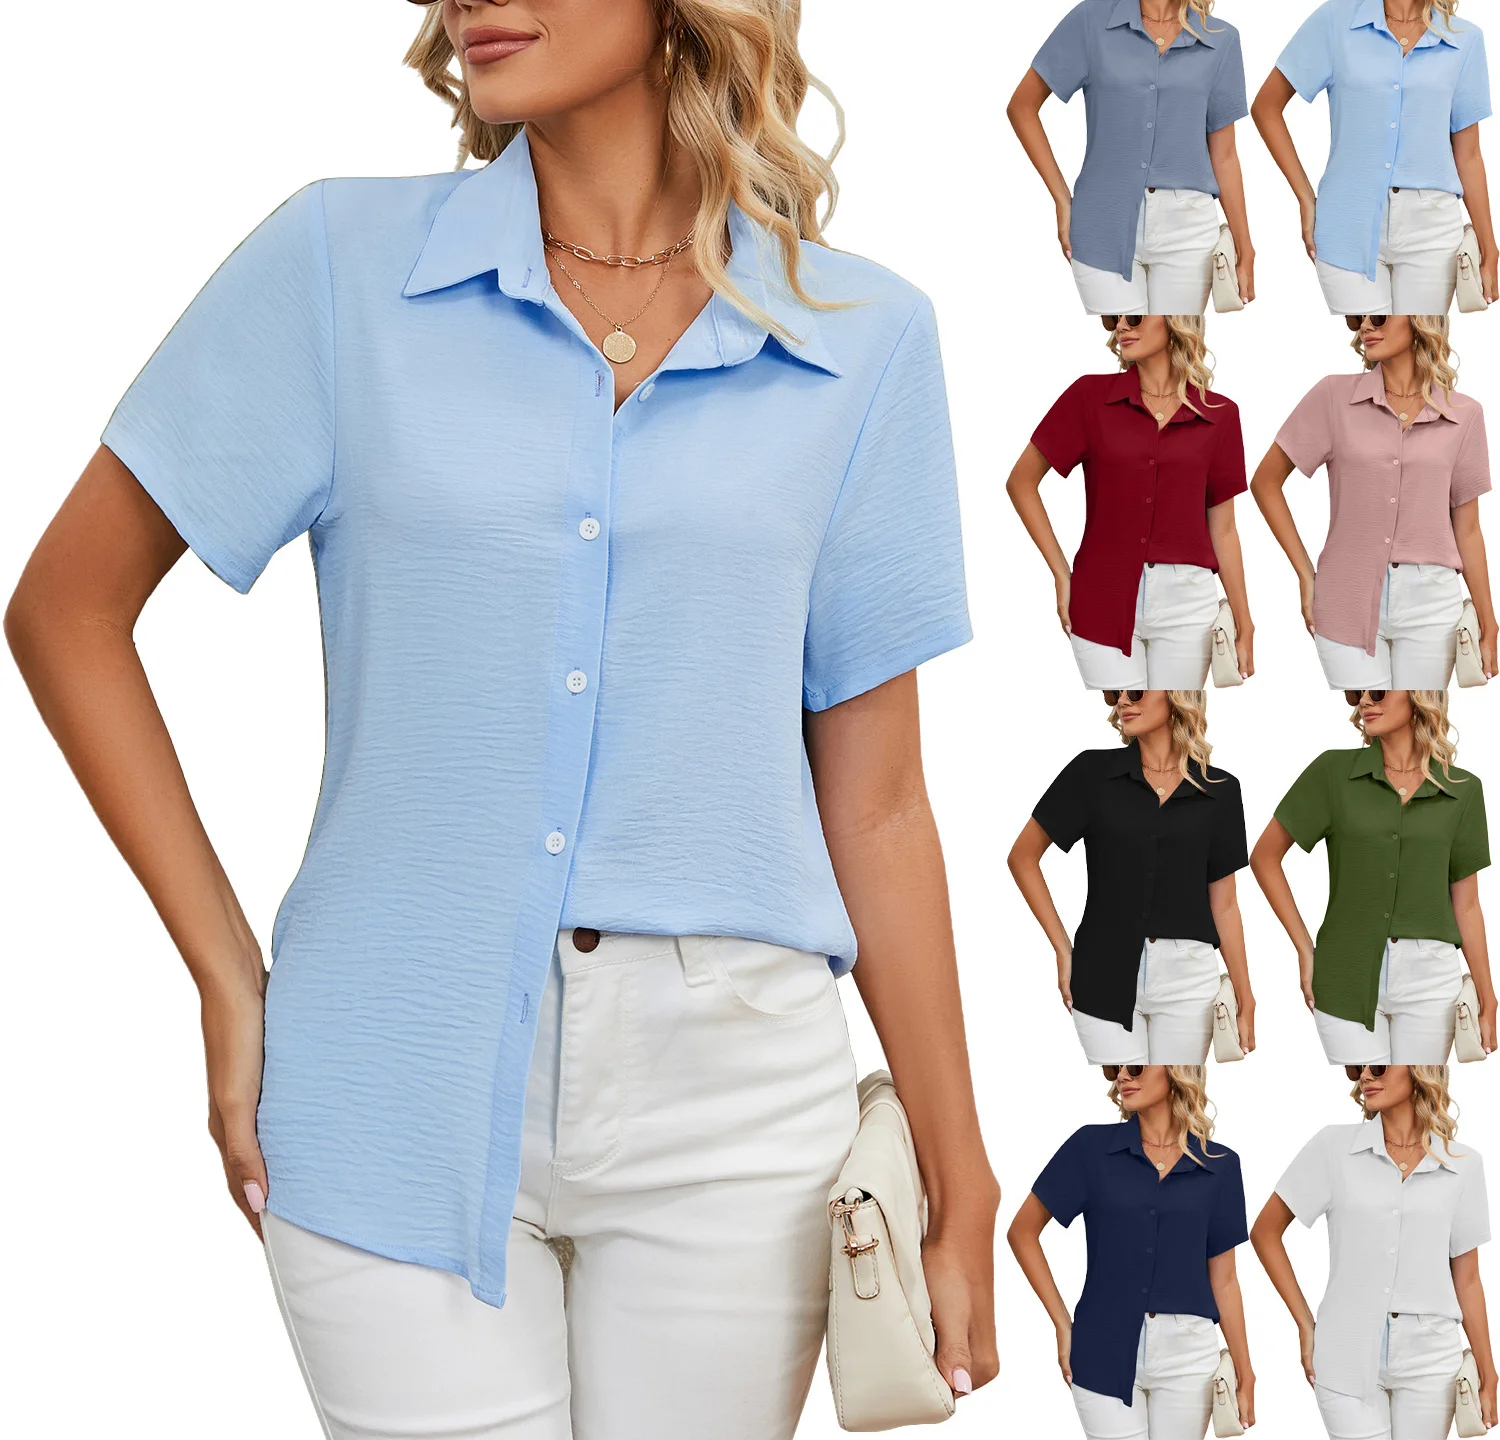 

Women's Casual Loose Fitting Short Sleeve Button Up V-neck Solid Color Shirt Top for Women